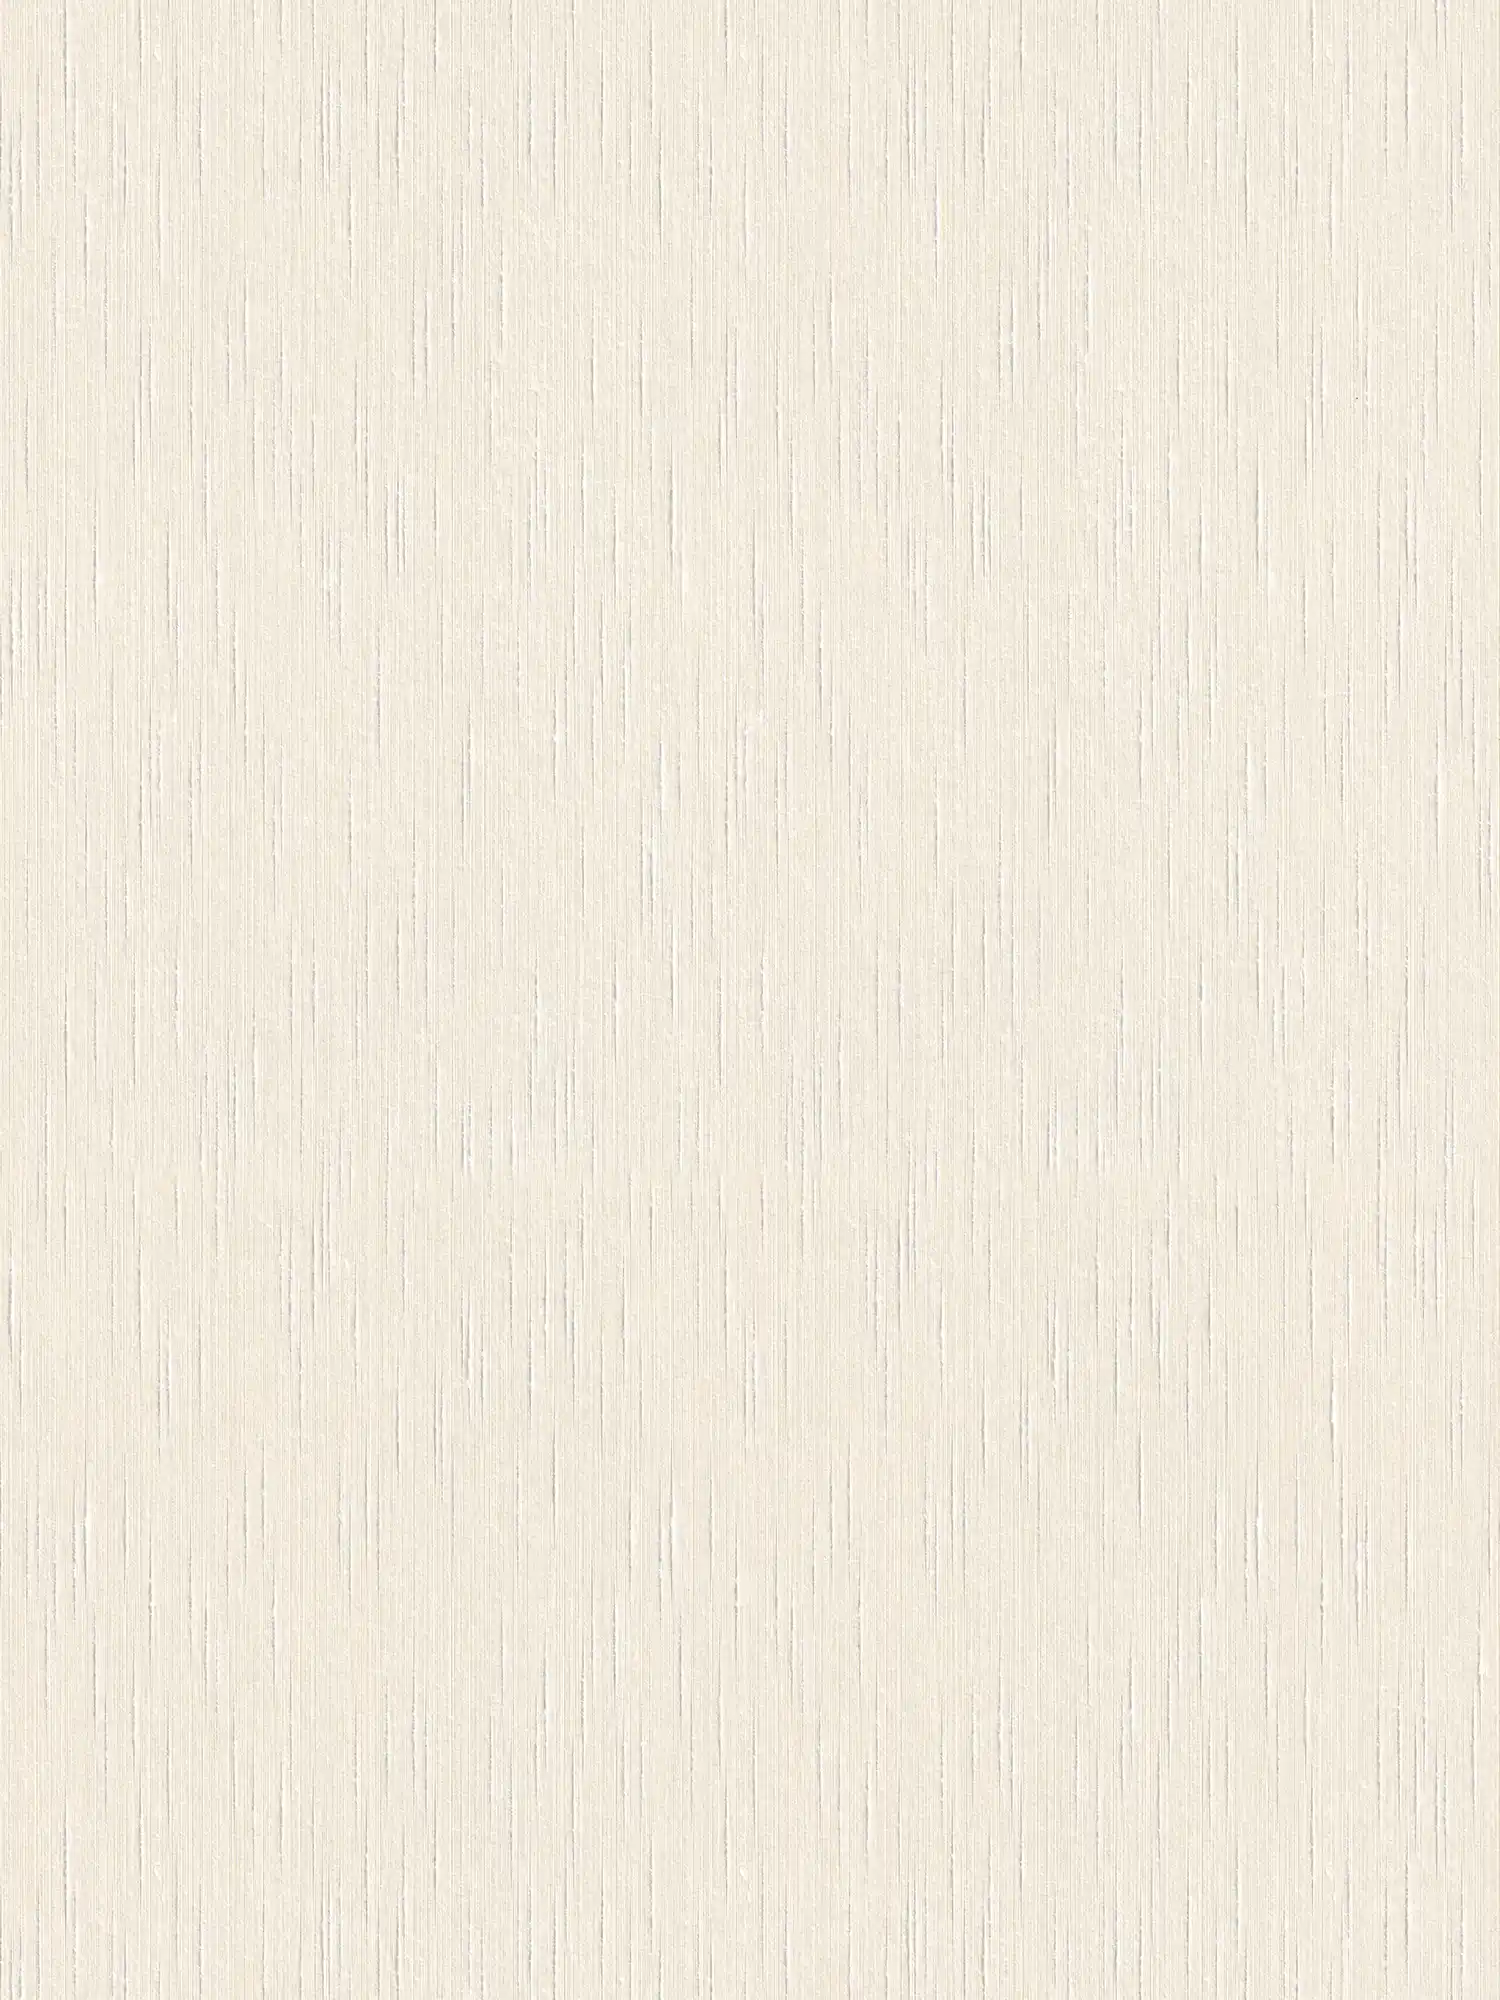         Non-woven wallpaper cream plain with textile texture in Dupion style
    